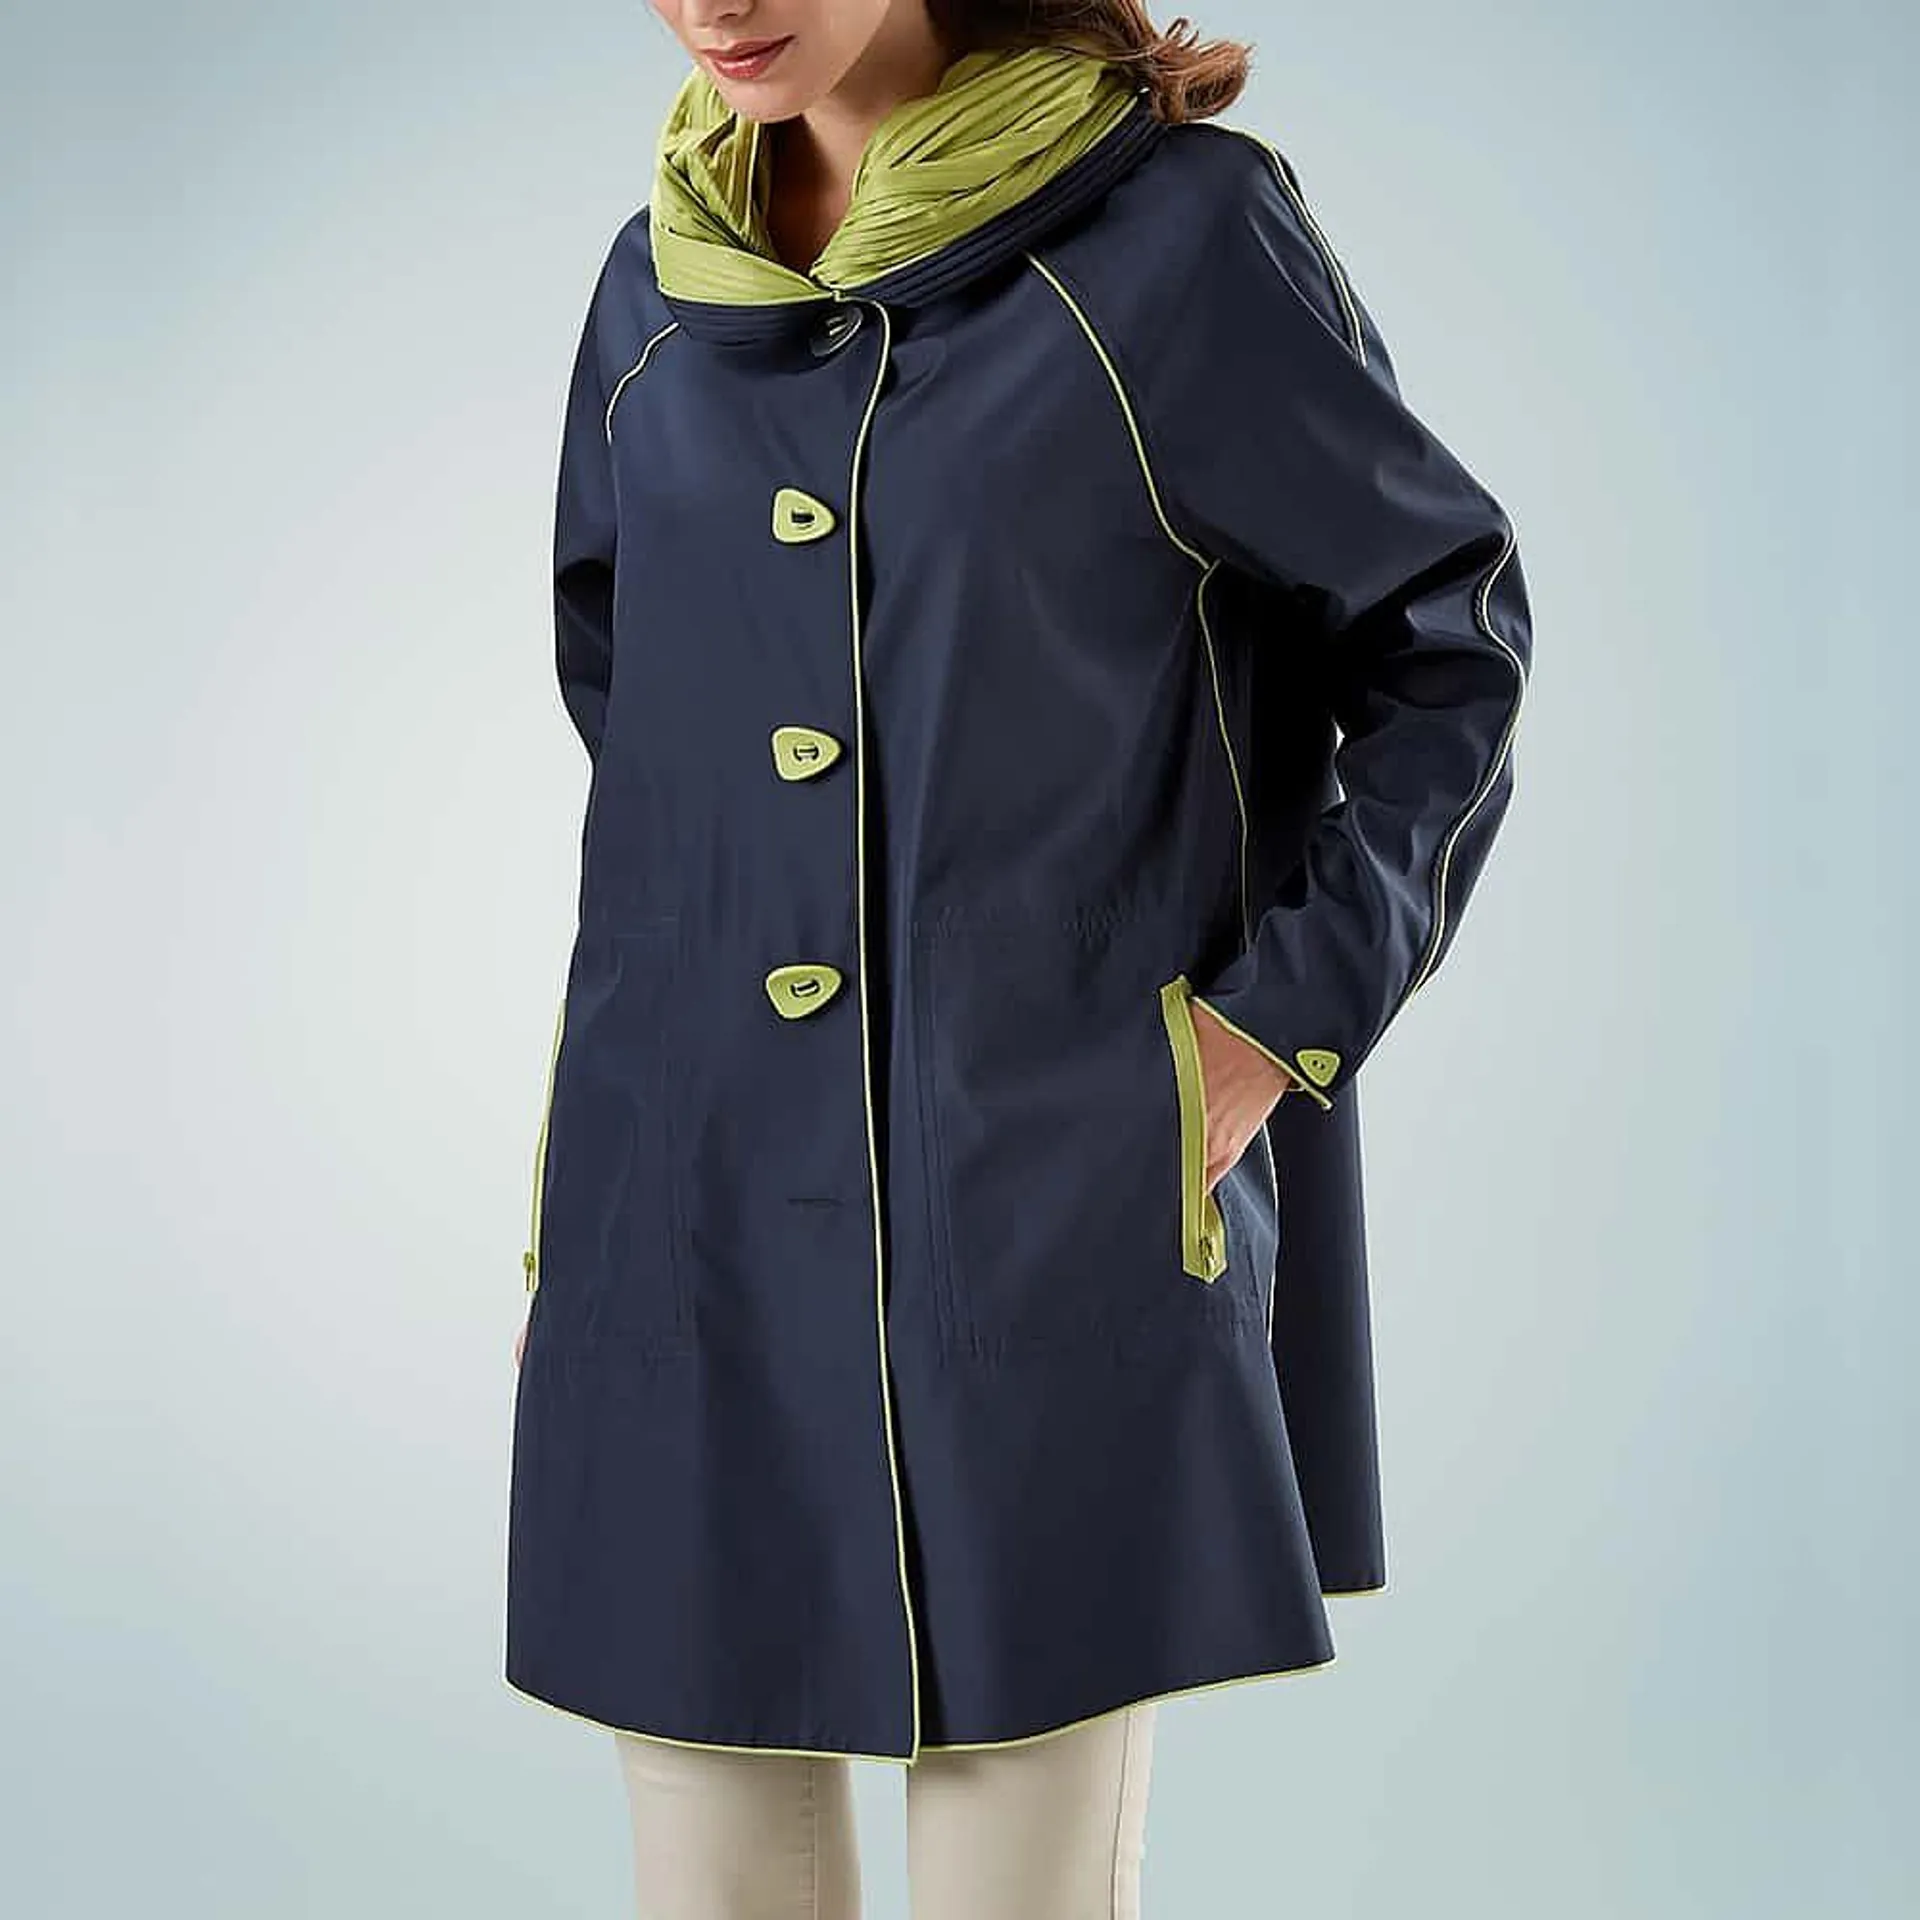 The Bright Side Navy Raincoat